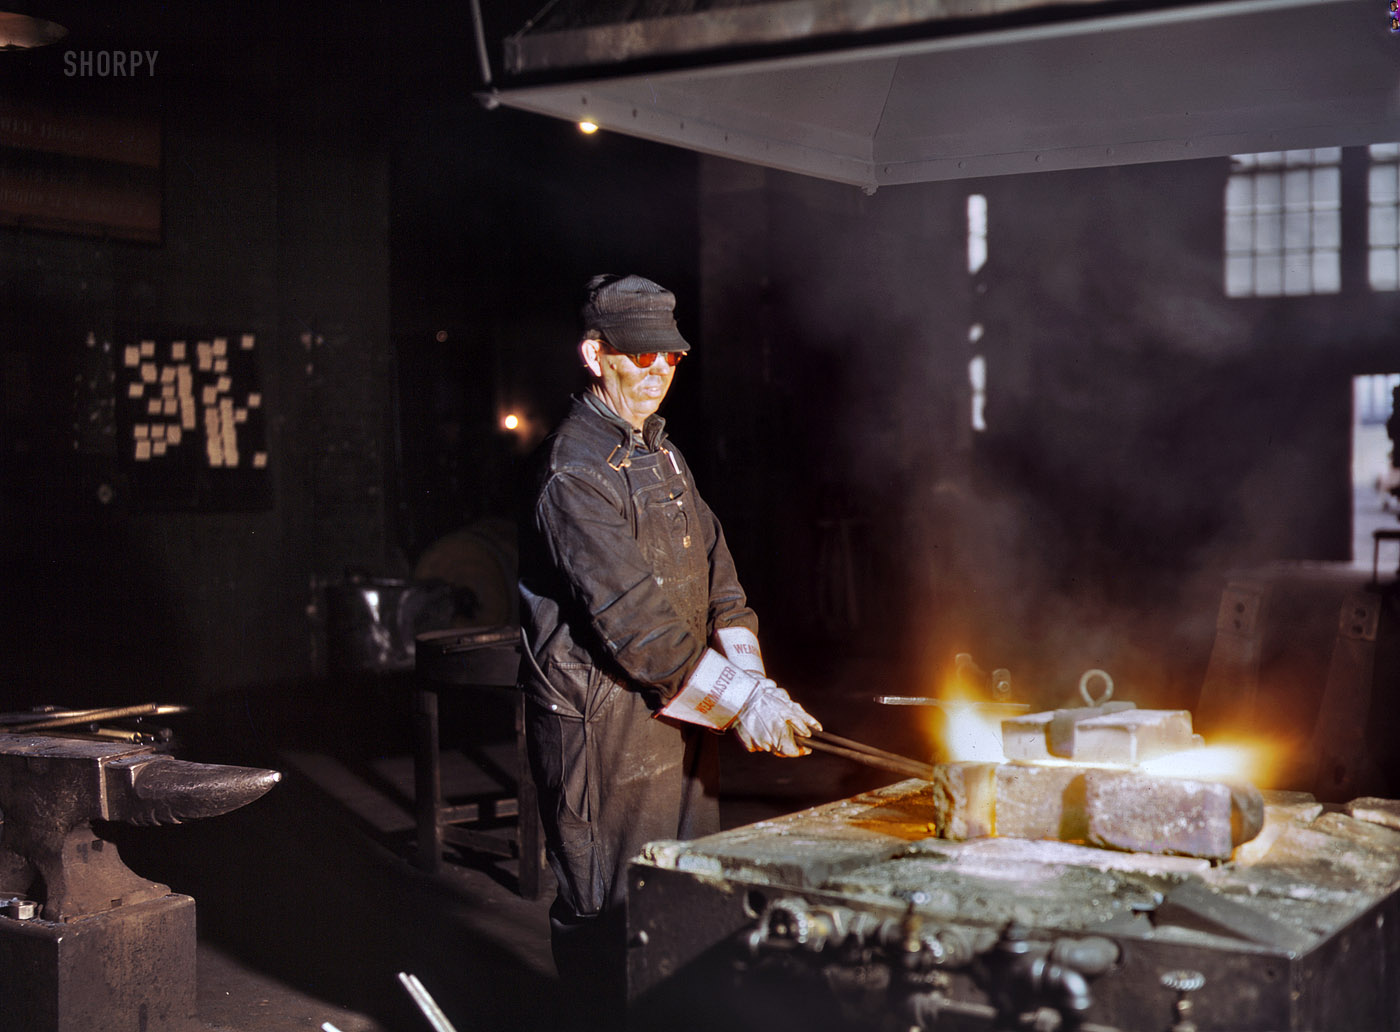 April 1943. Blue Island, Illinois. "John Kelseh, blacksmith, at his forge in the blacksmith shop at the roundhouse, Rock Island R.R." 4x5 Kodachrome transparency by Jack Delano for the Office of War Information. View full size.